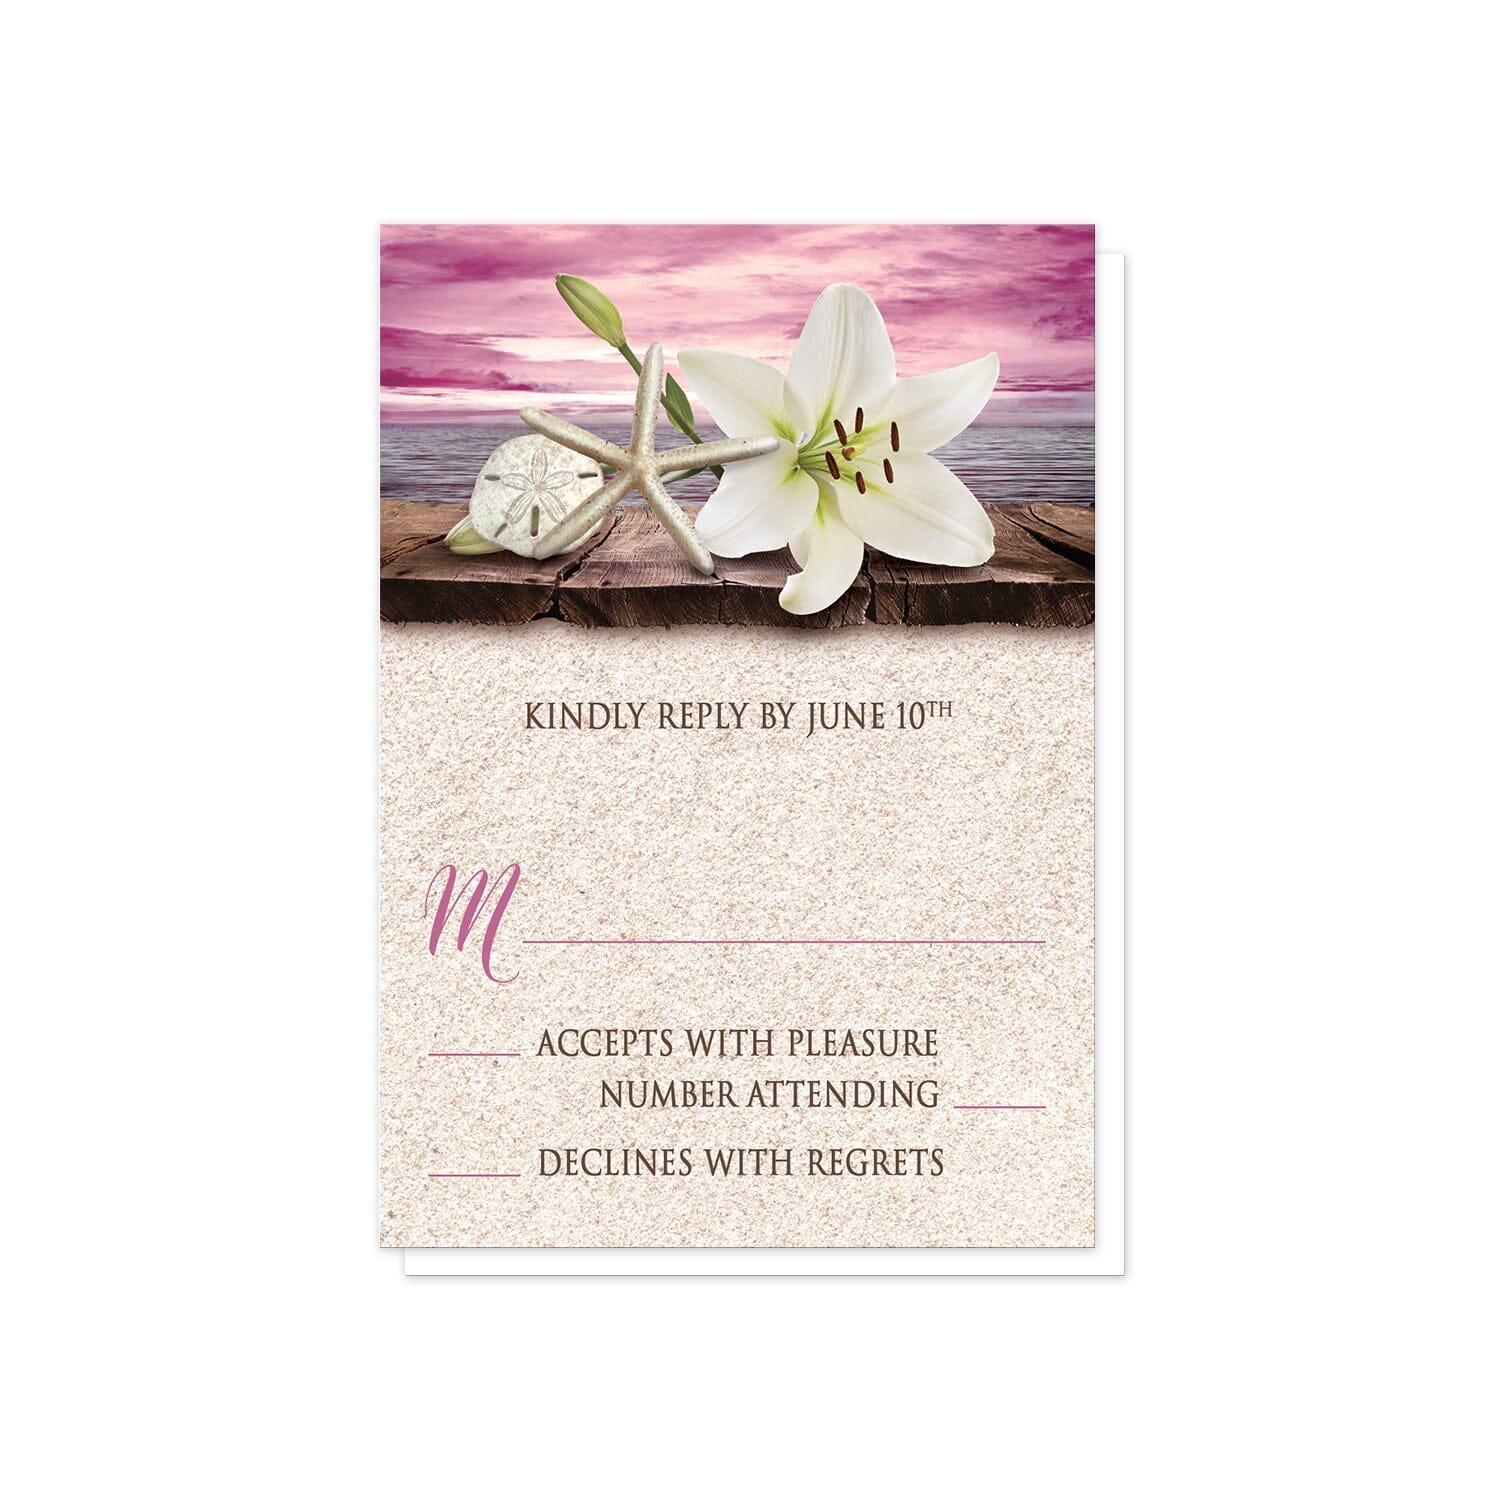 Lily Seashells and Sand Magenta Beach RSVP Cards at Artistically Invited.